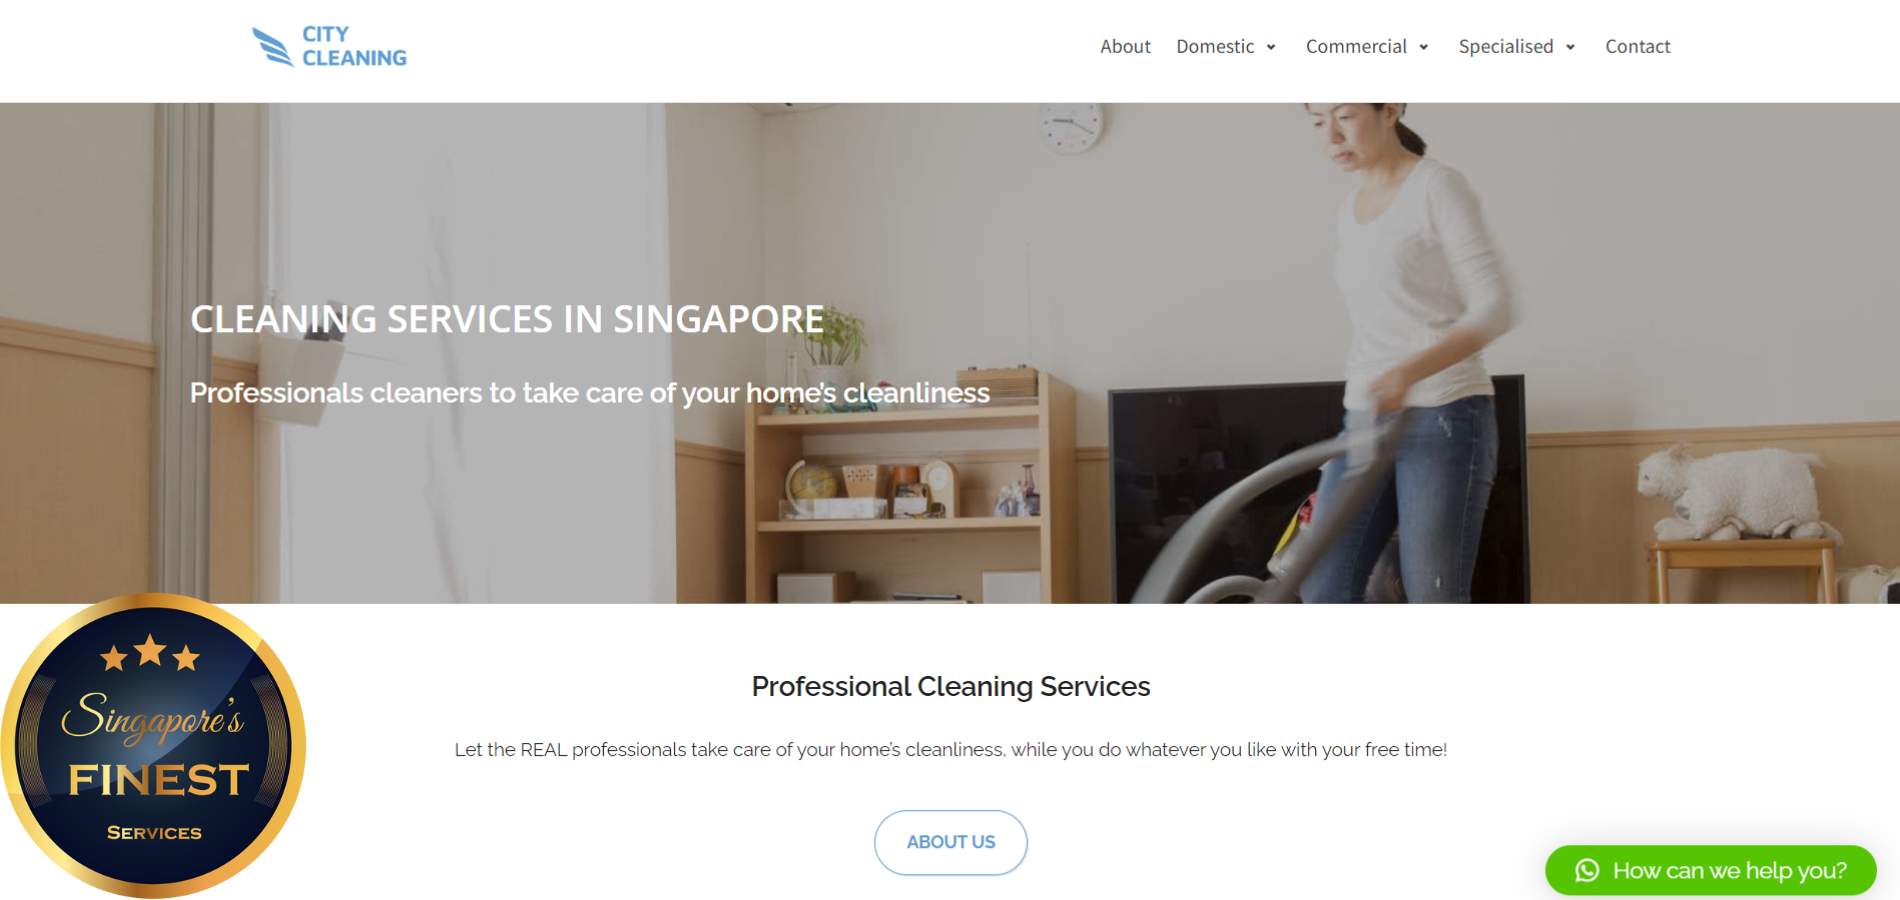 The Finest House Cleaning Services in Singapore